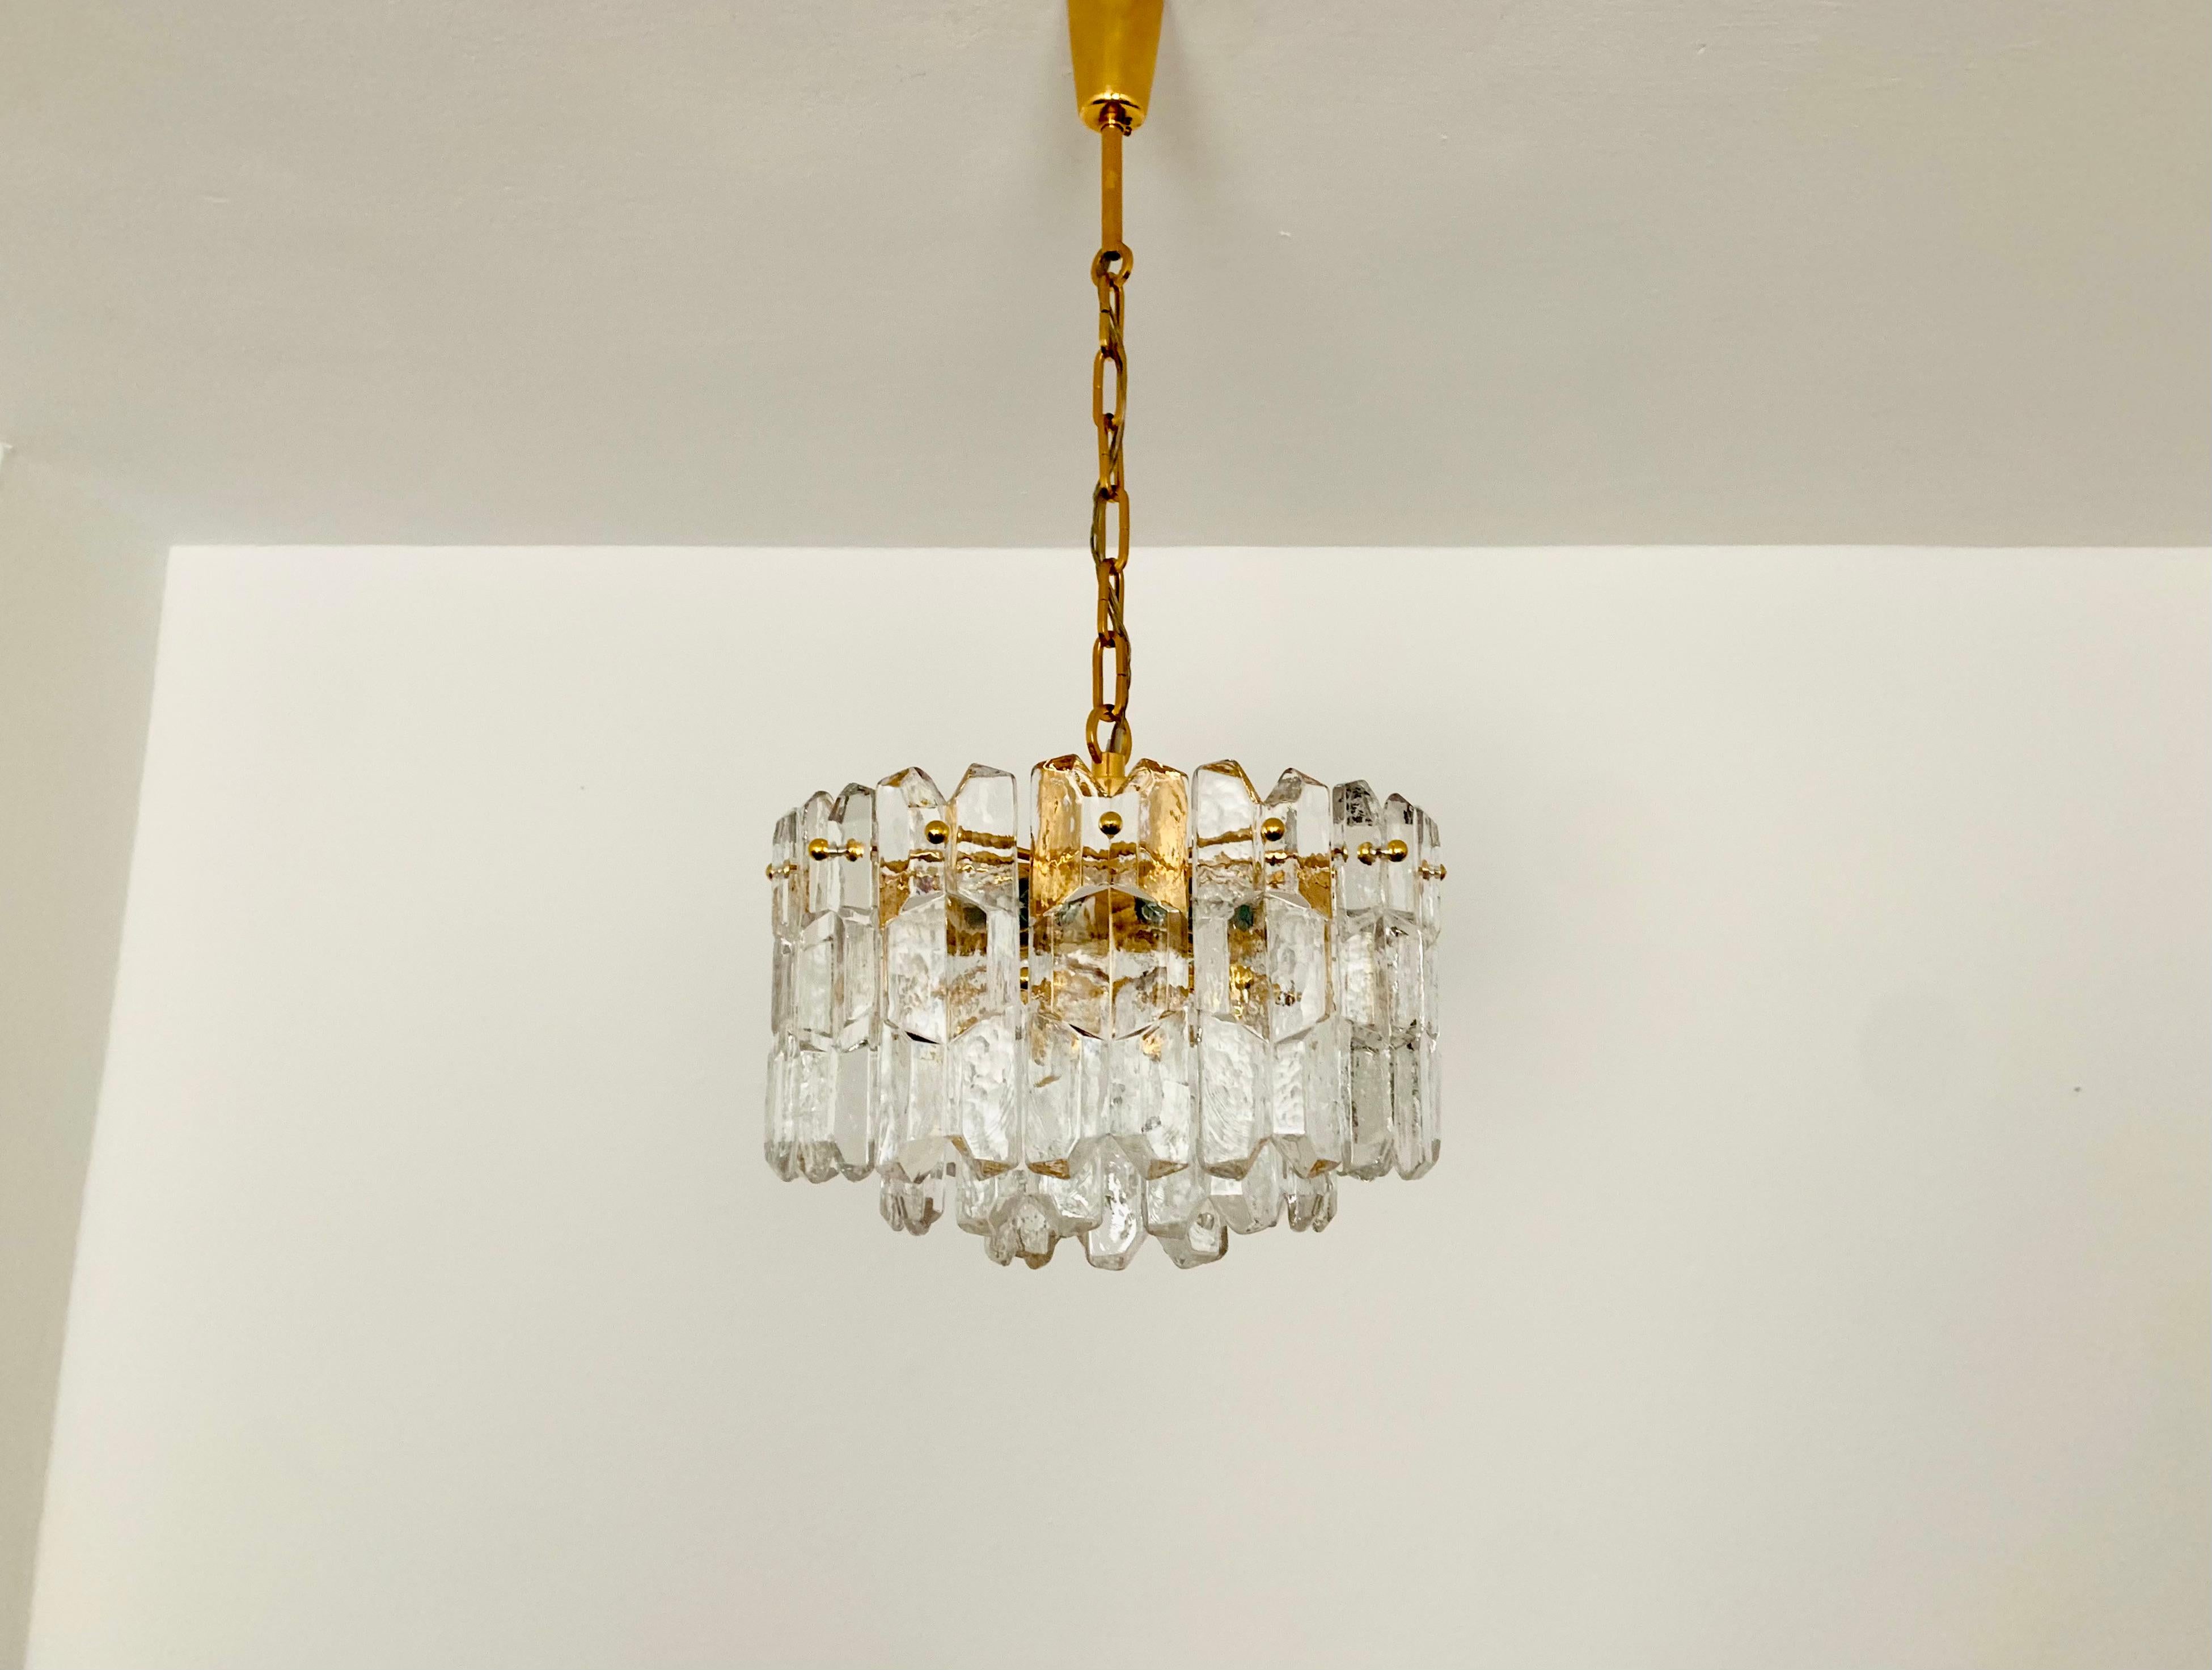 Wonderful ice glass chandelier from the 1960s.
The beautifully formed Murano glass elements create an impressive, sparkling play of light.
Exceptionally high-quality workmanship.
Very noble and luxurious appearance and a real eye-catcher for